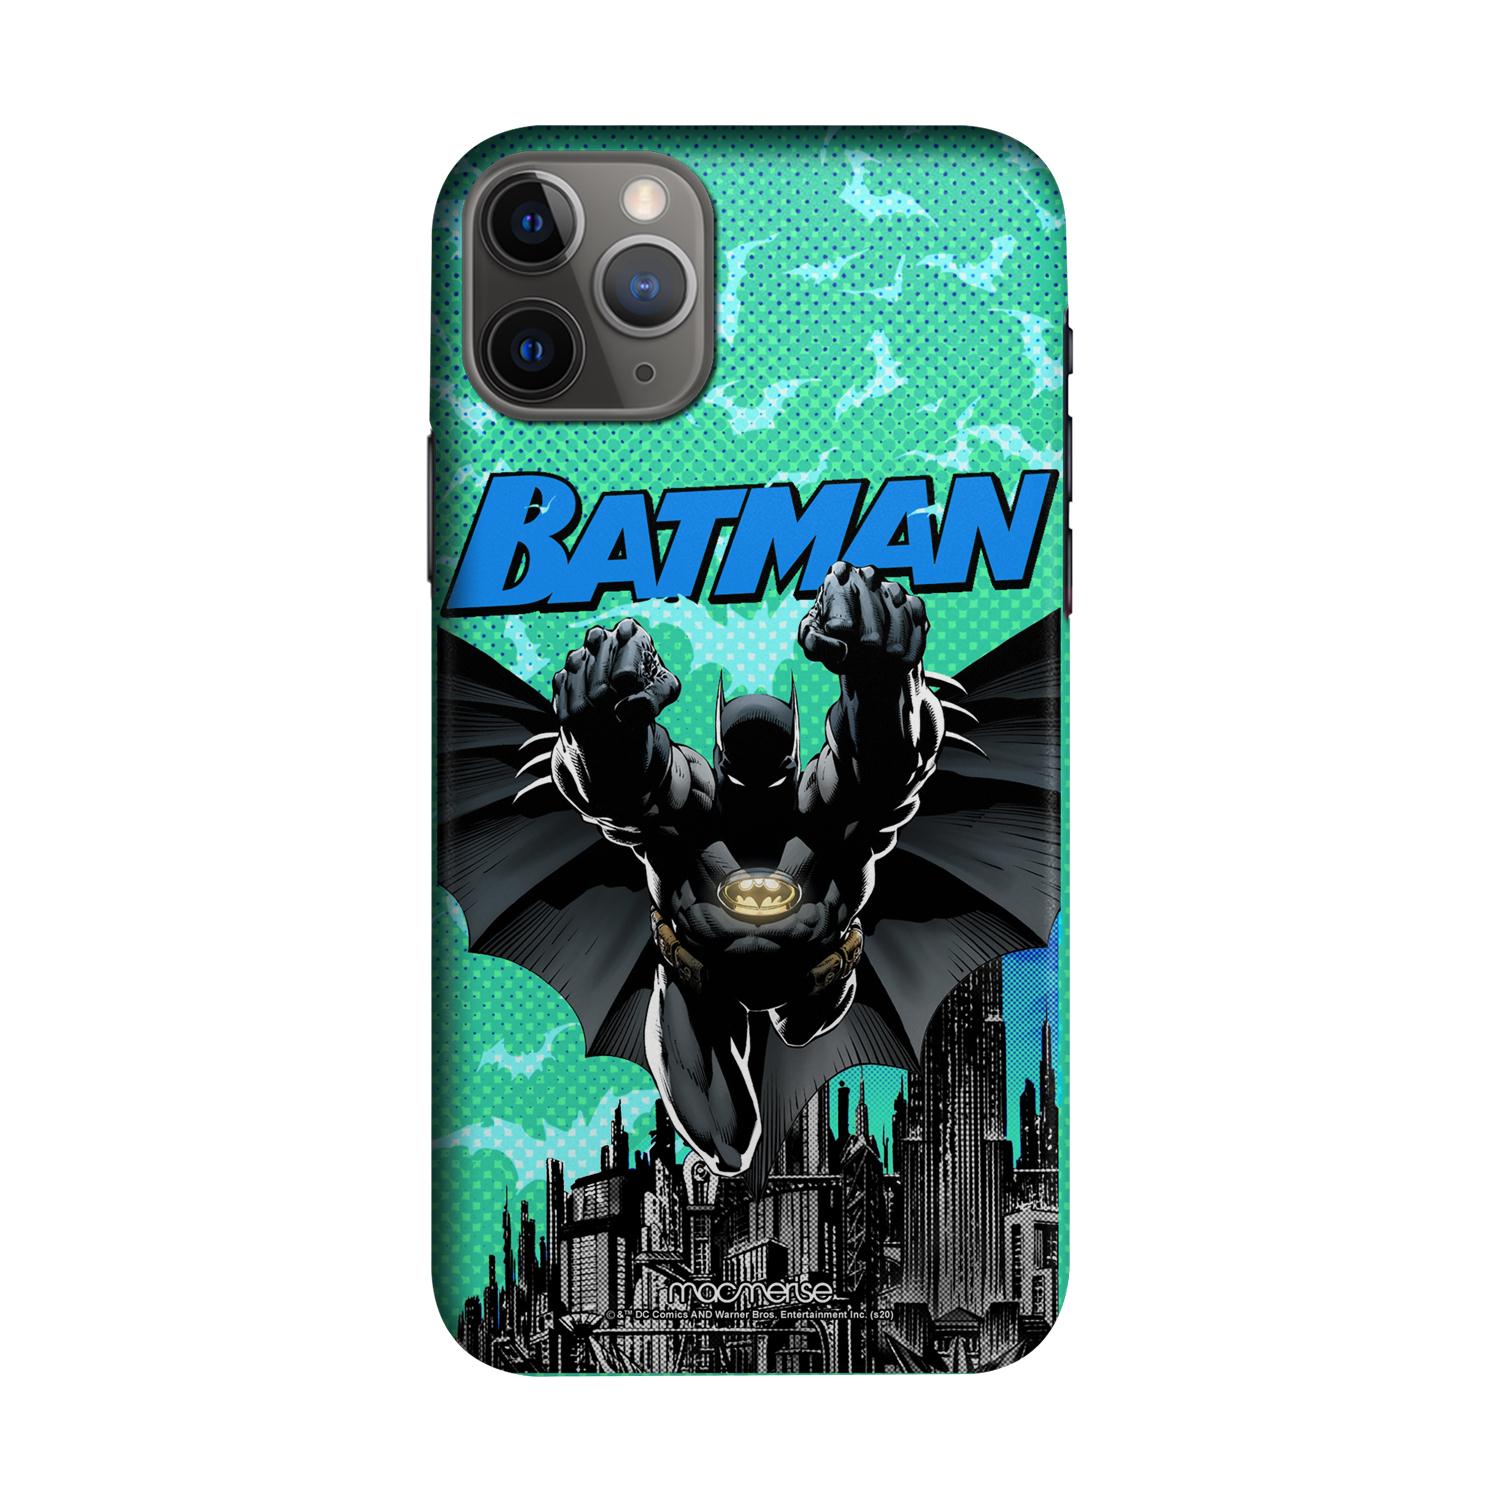 Buy Bat on the hunt - Sleek Phone Case for iPhone 11 Pro Max Online